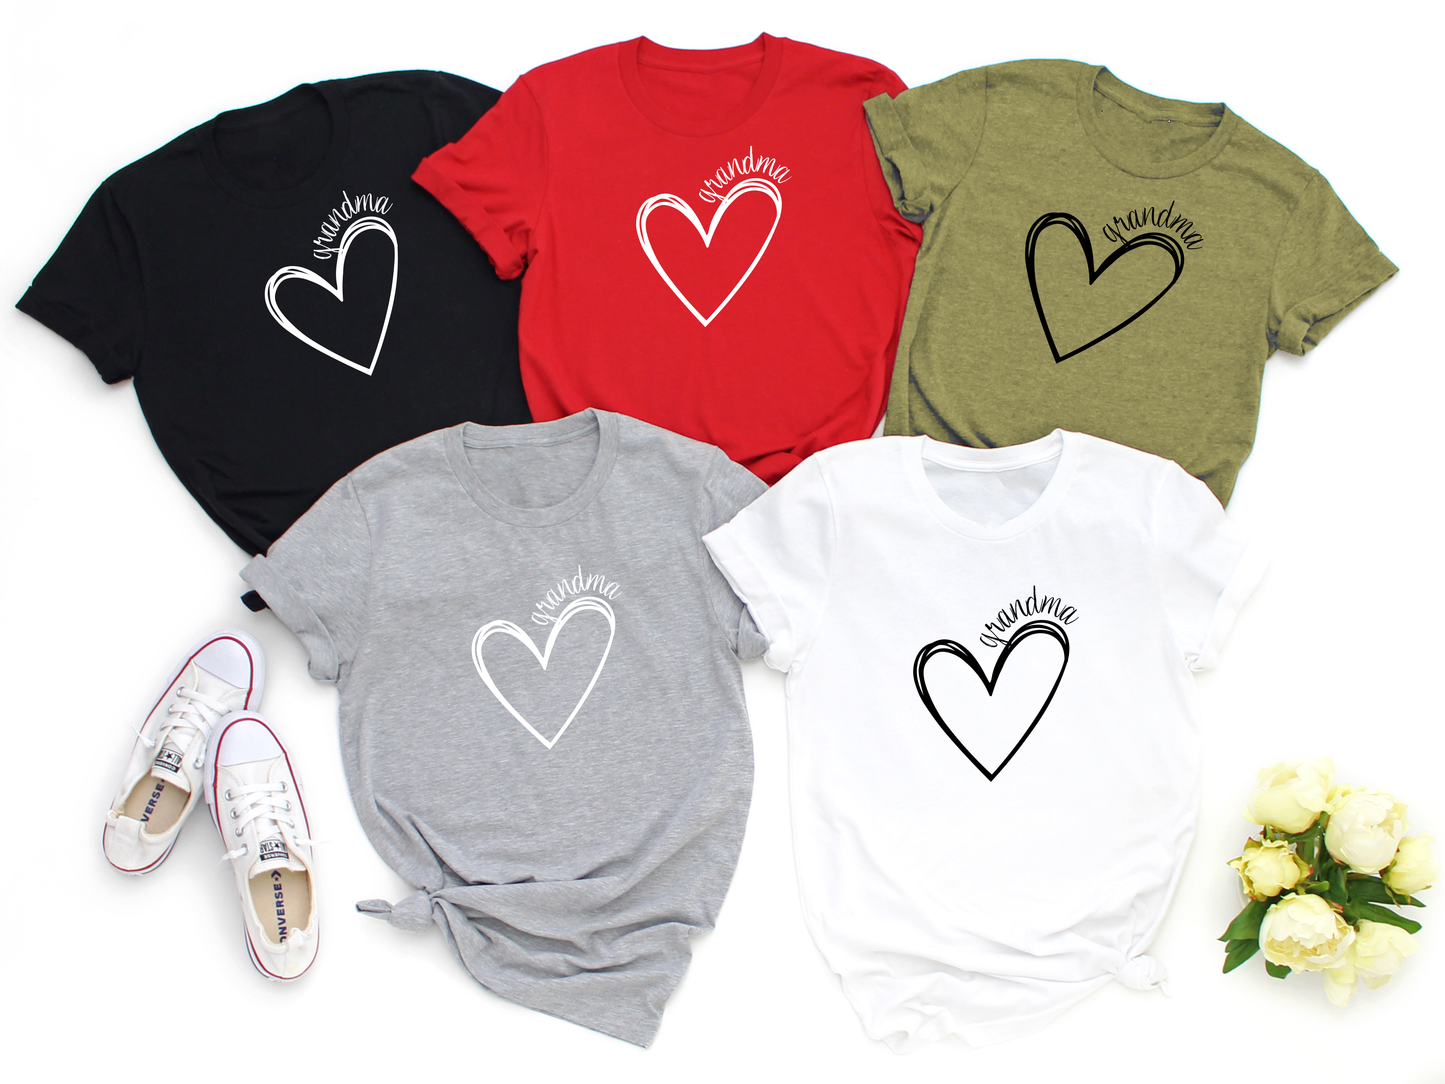 "Show your love for your grandchildren with this adorable 'Grandma Heart' shirt."